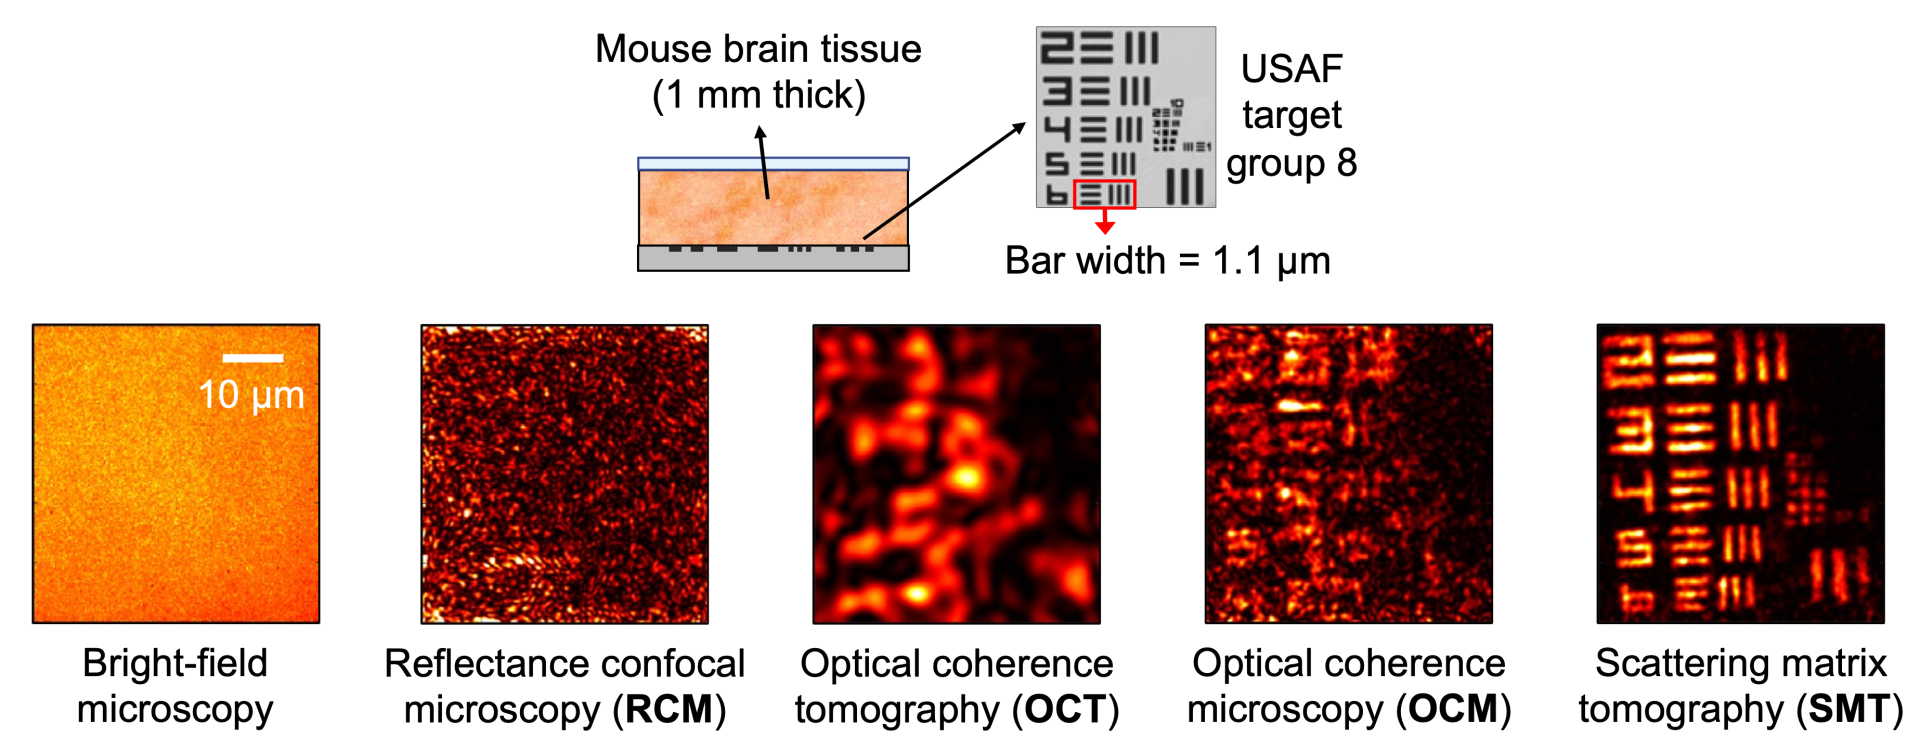 Imaging beneath mouse brain tissue with scattering matrix tomography.